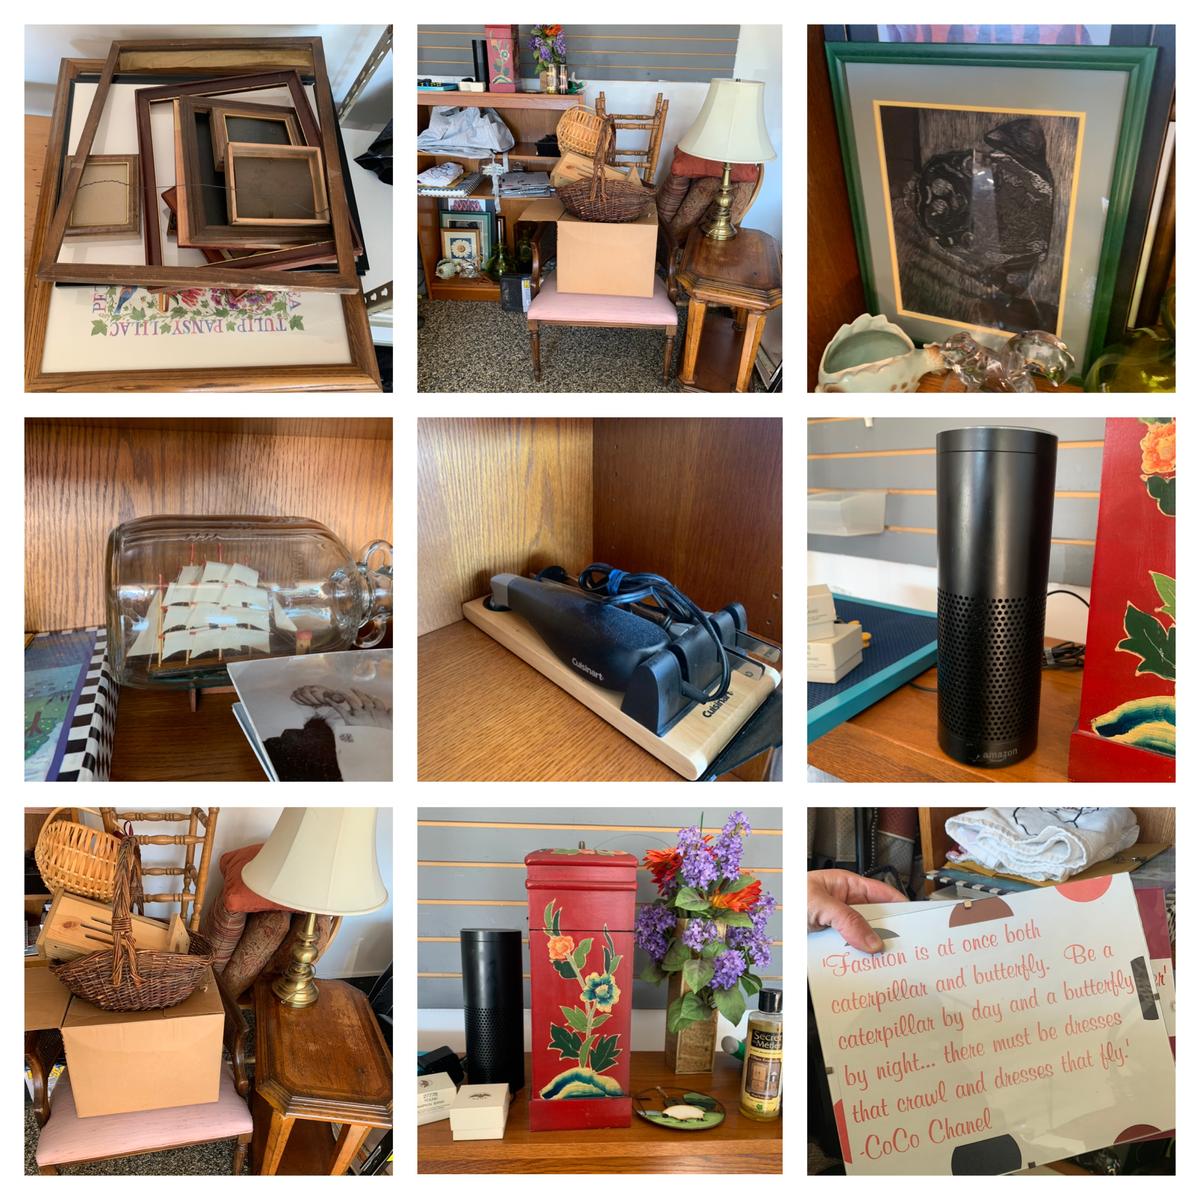 Household Items - Frames, Shelf, Lamp, End Stand, Stools, Horse Shoes, Lamp Shades & More